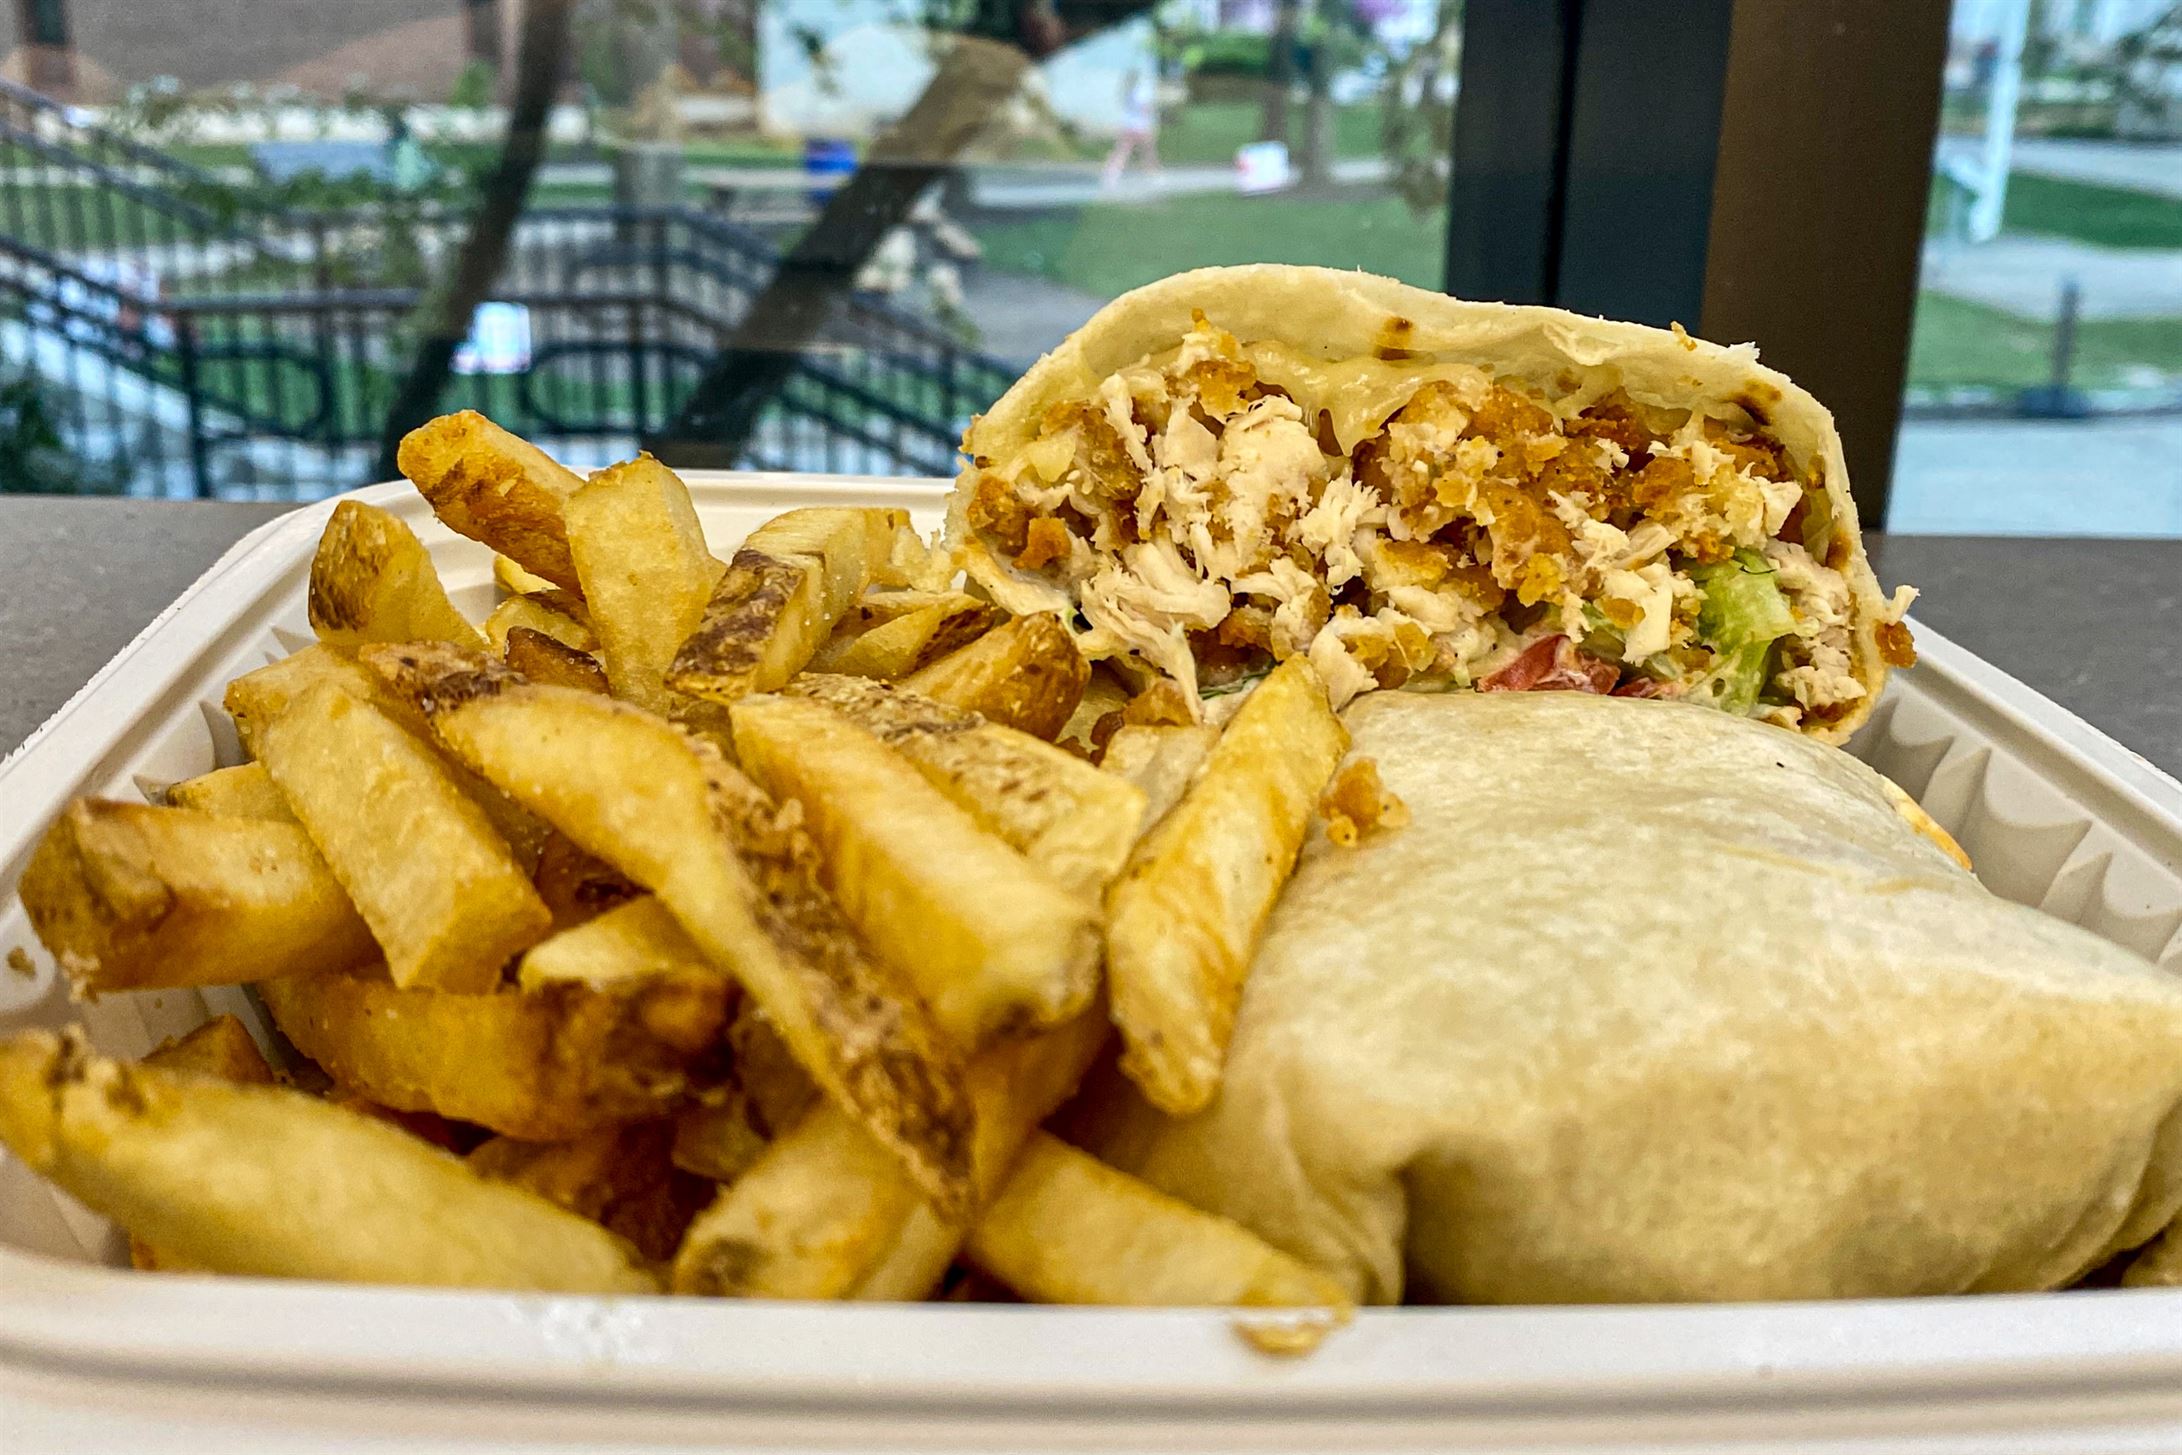 This Chicken Wrap from True Burger will be sure to leave you craving for more.
Sal DiMaggio | The Montclarion